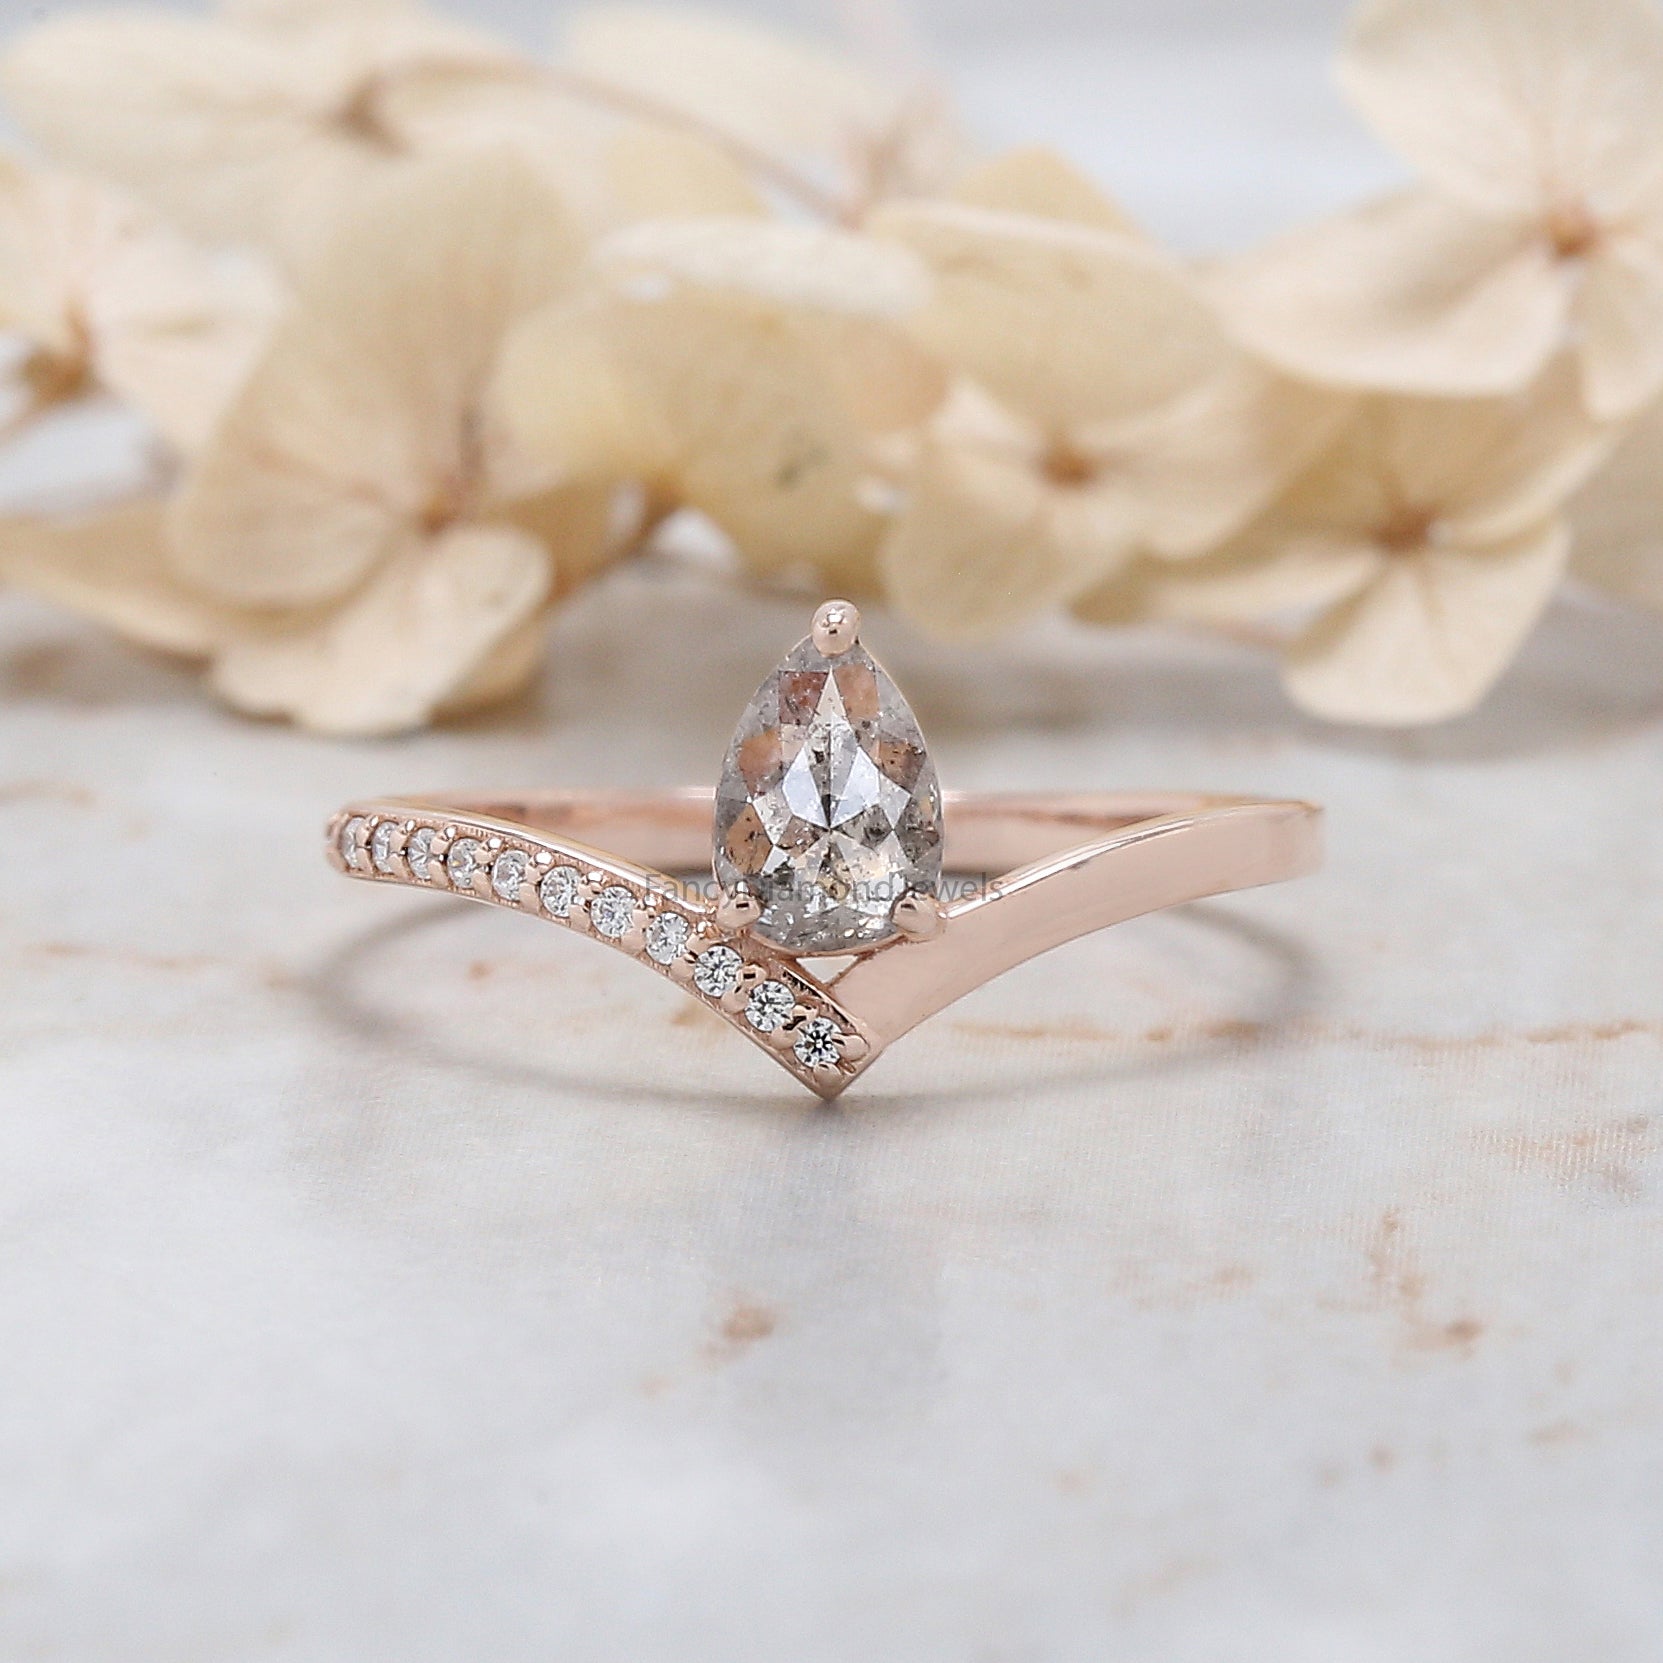 Pear Cut Salt And Pepper Diamond Ring 0.39 Ct 5.95 MM Pear Diamond Ring 14K Solid Rose Gold Silver Pear Engagement Ring Gift For Her QN606